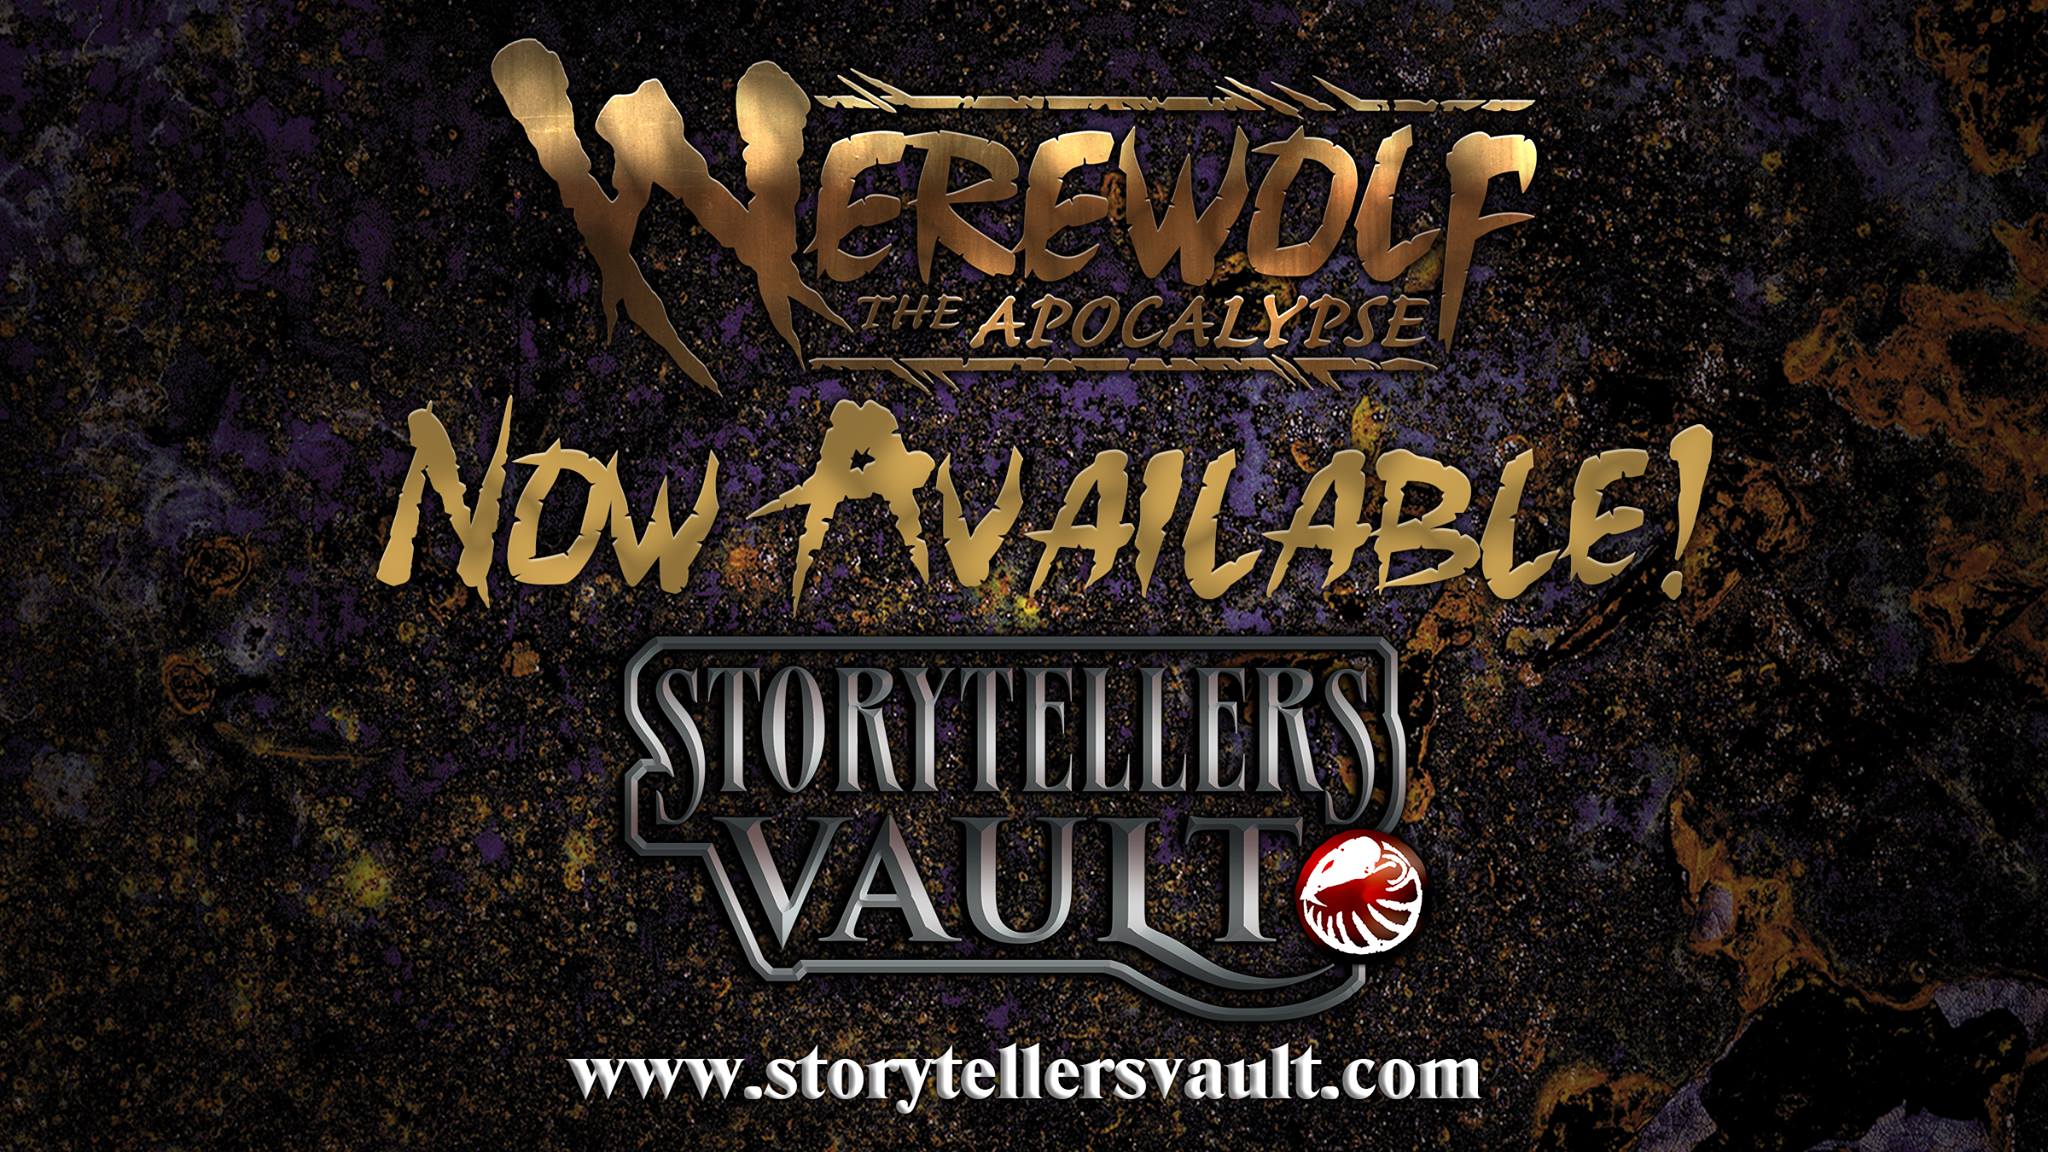 Special Edition: Storytellers Vault for Werewolf: The Apocalpse